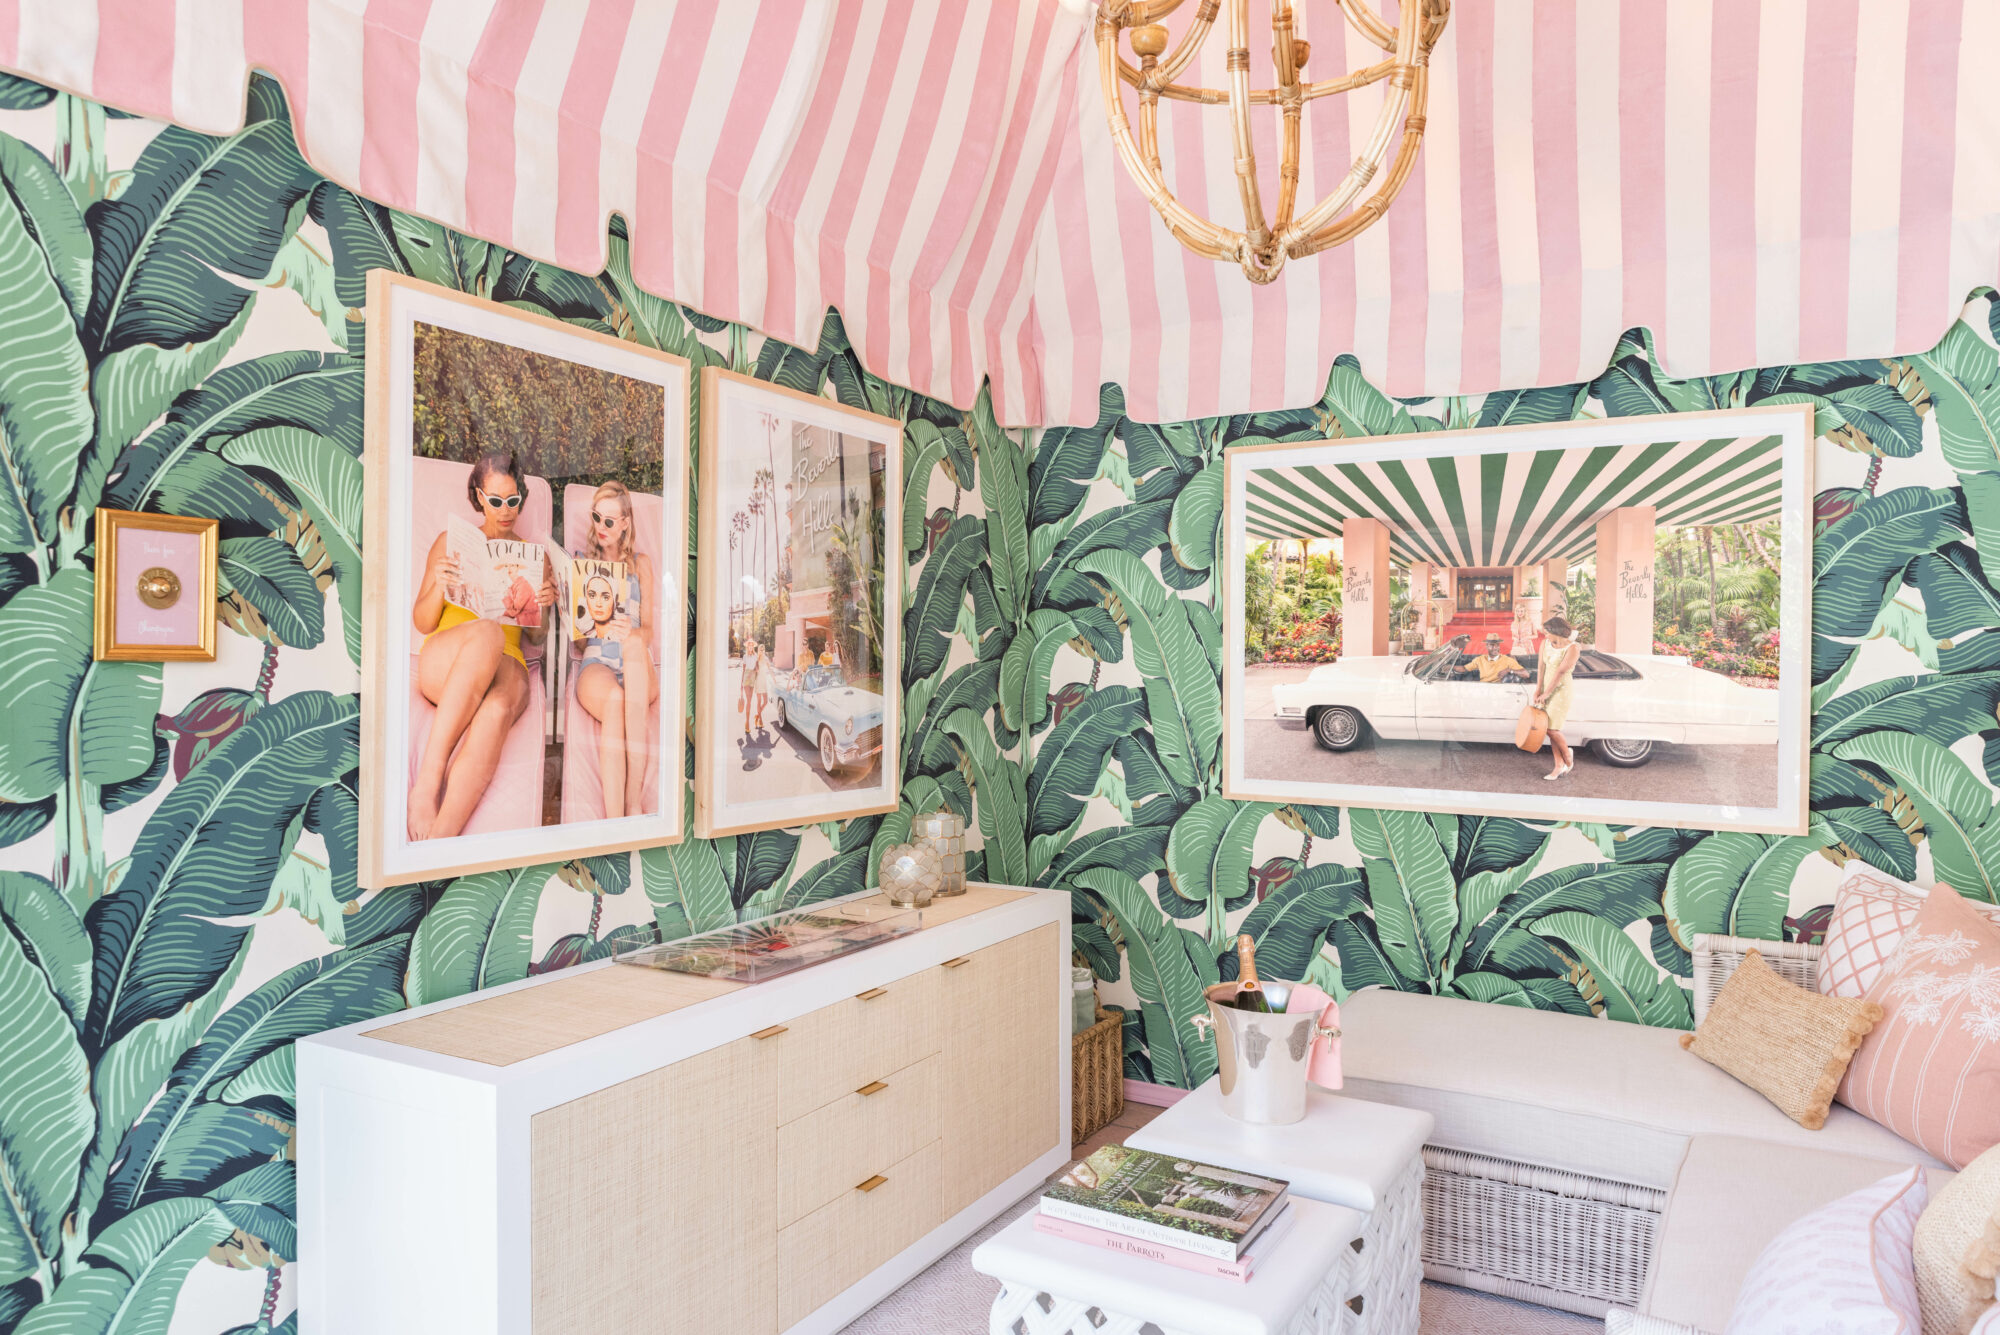 The pink-striped canopy and Gray Malin's artwork are visible from this angle of the cabana